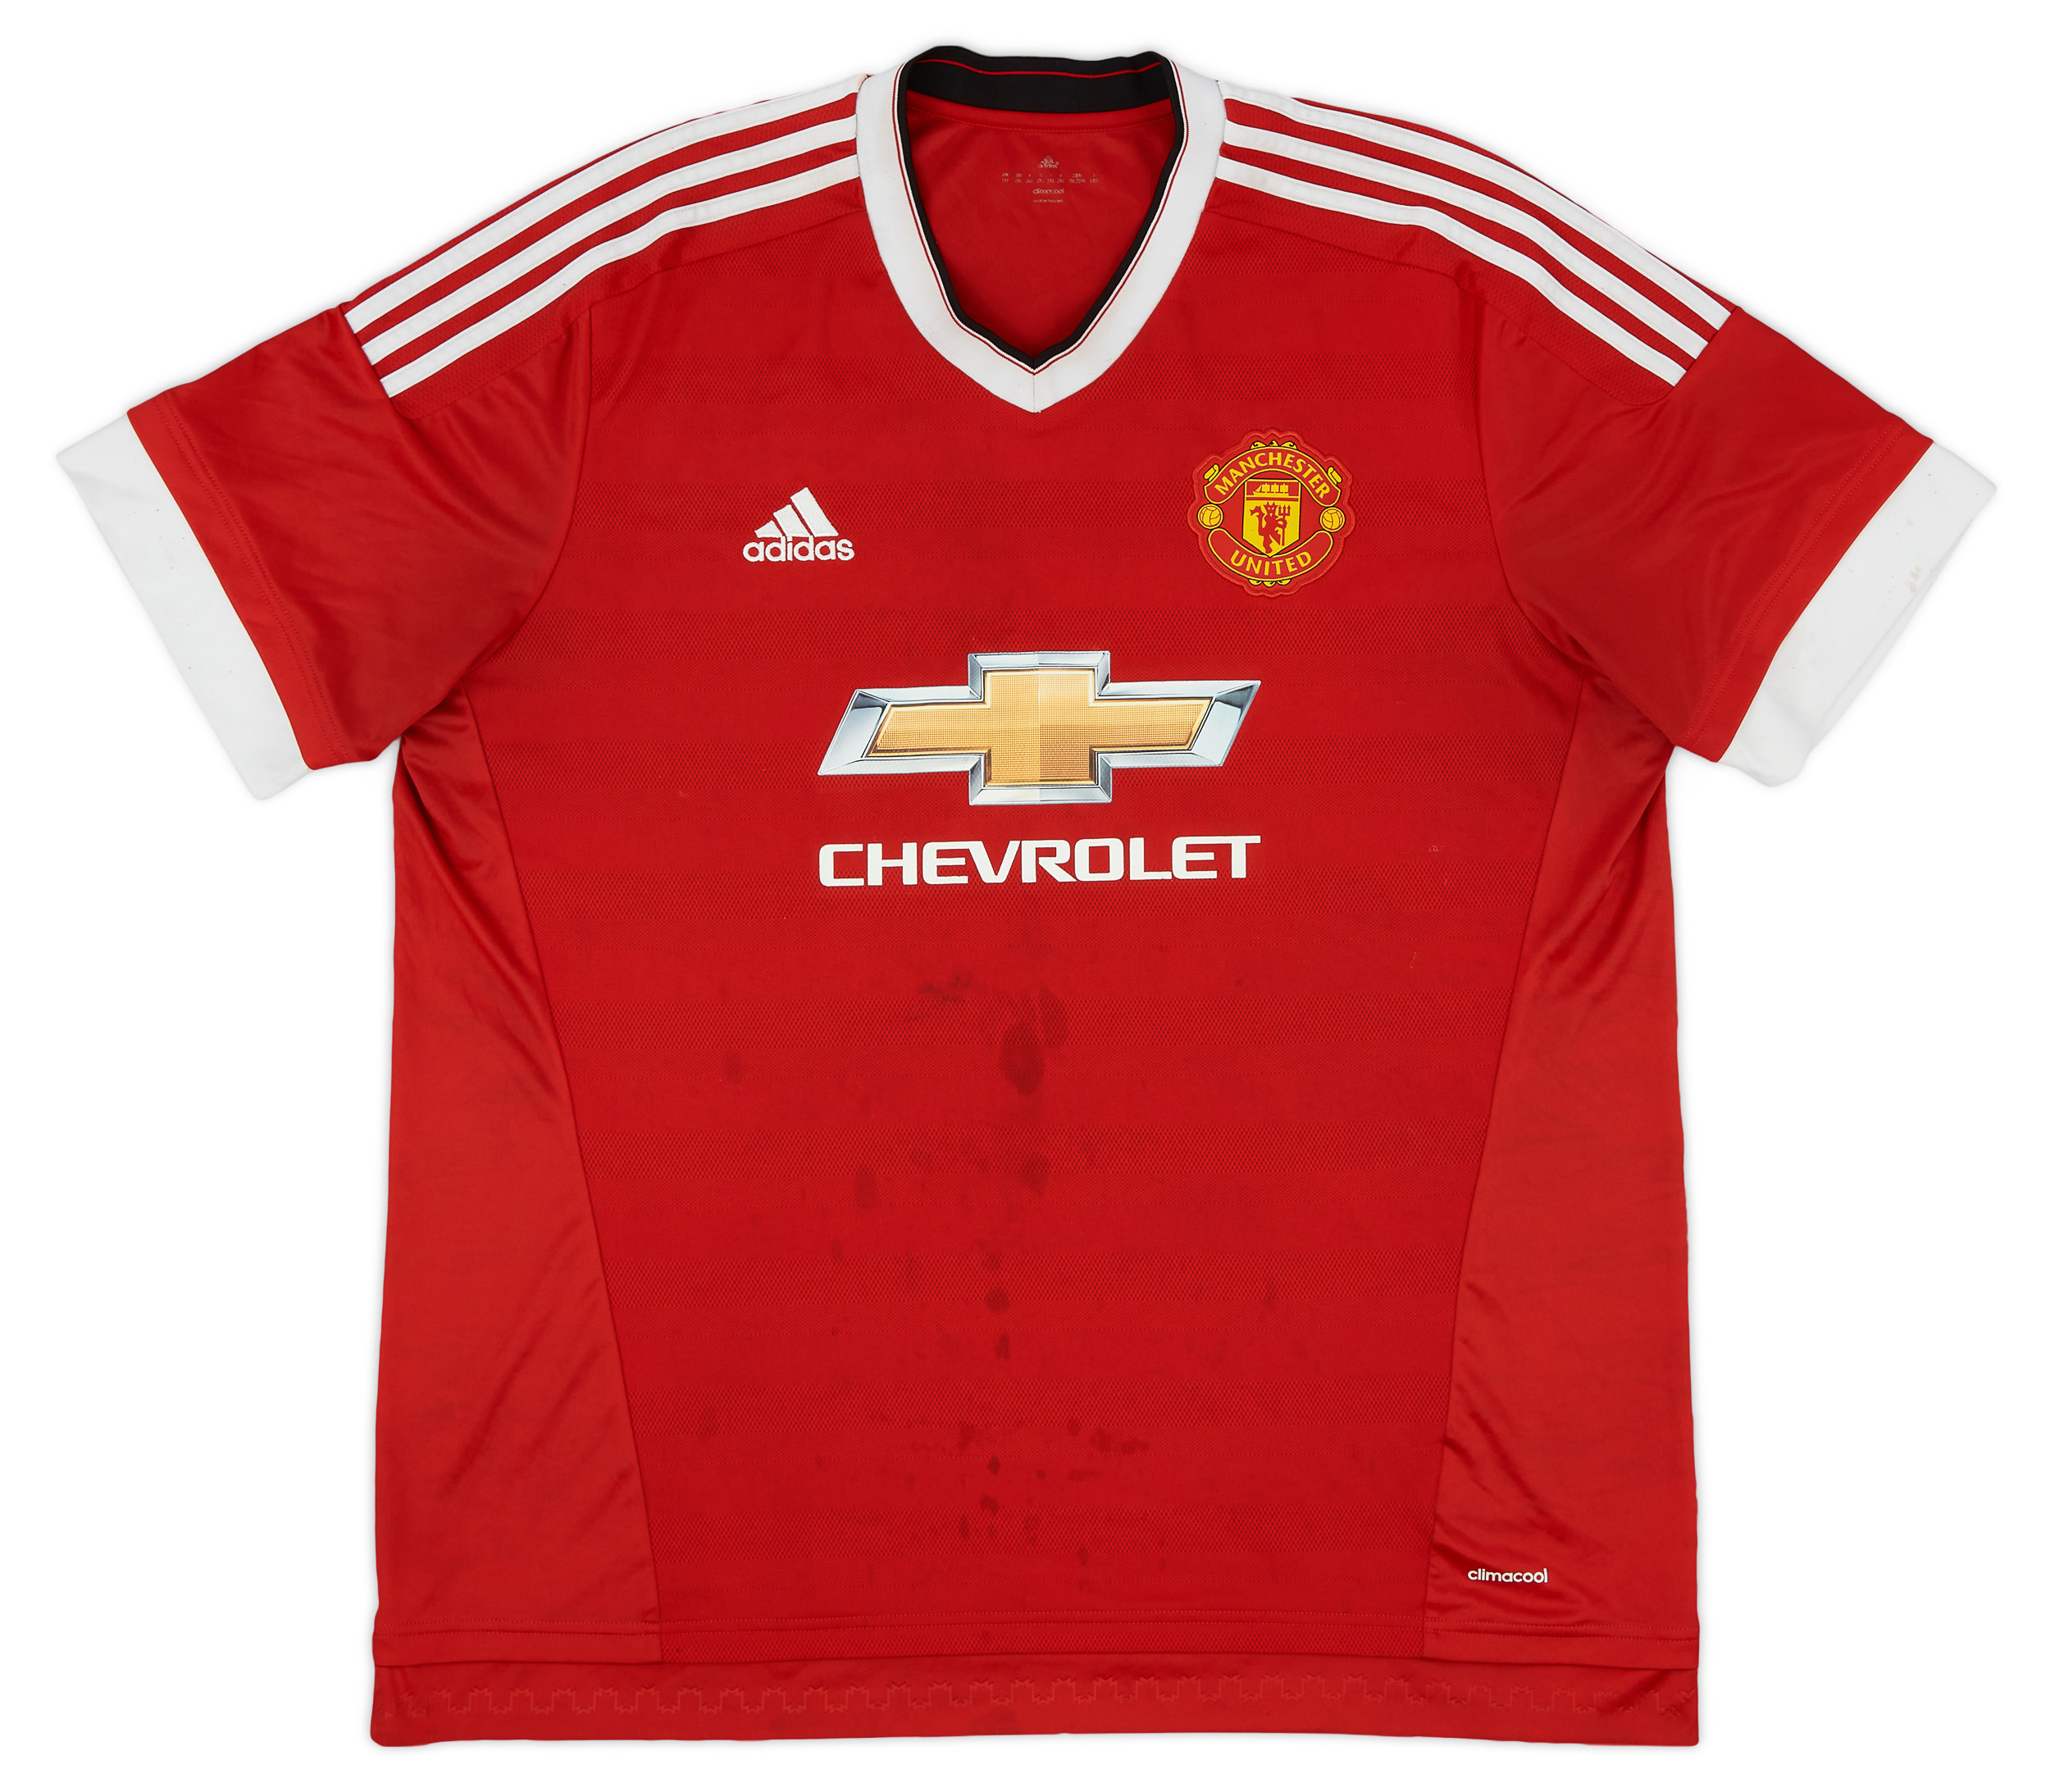 2015-16 Manchester United Home Shirt - 3/10 - ()